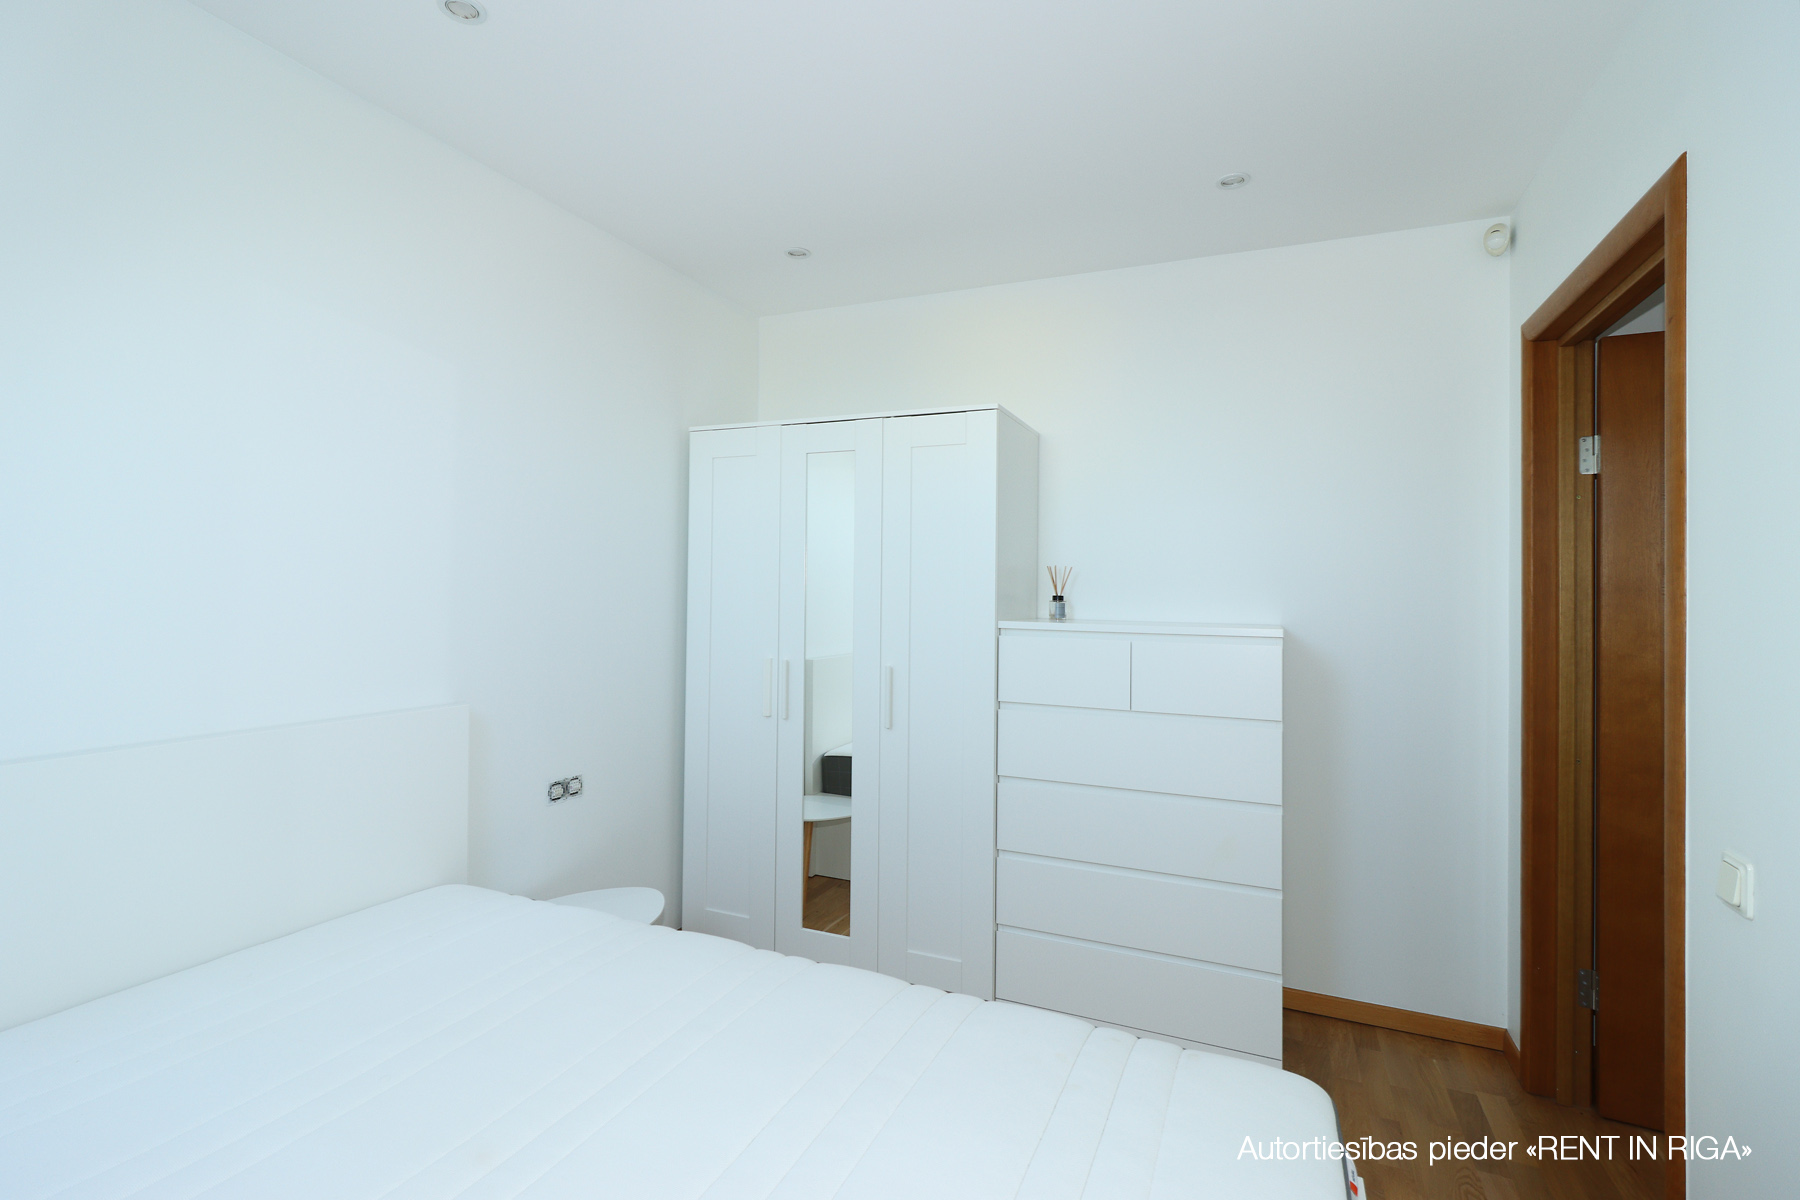 Apartment for rent, Ģertrūdes street 113 - Image 1